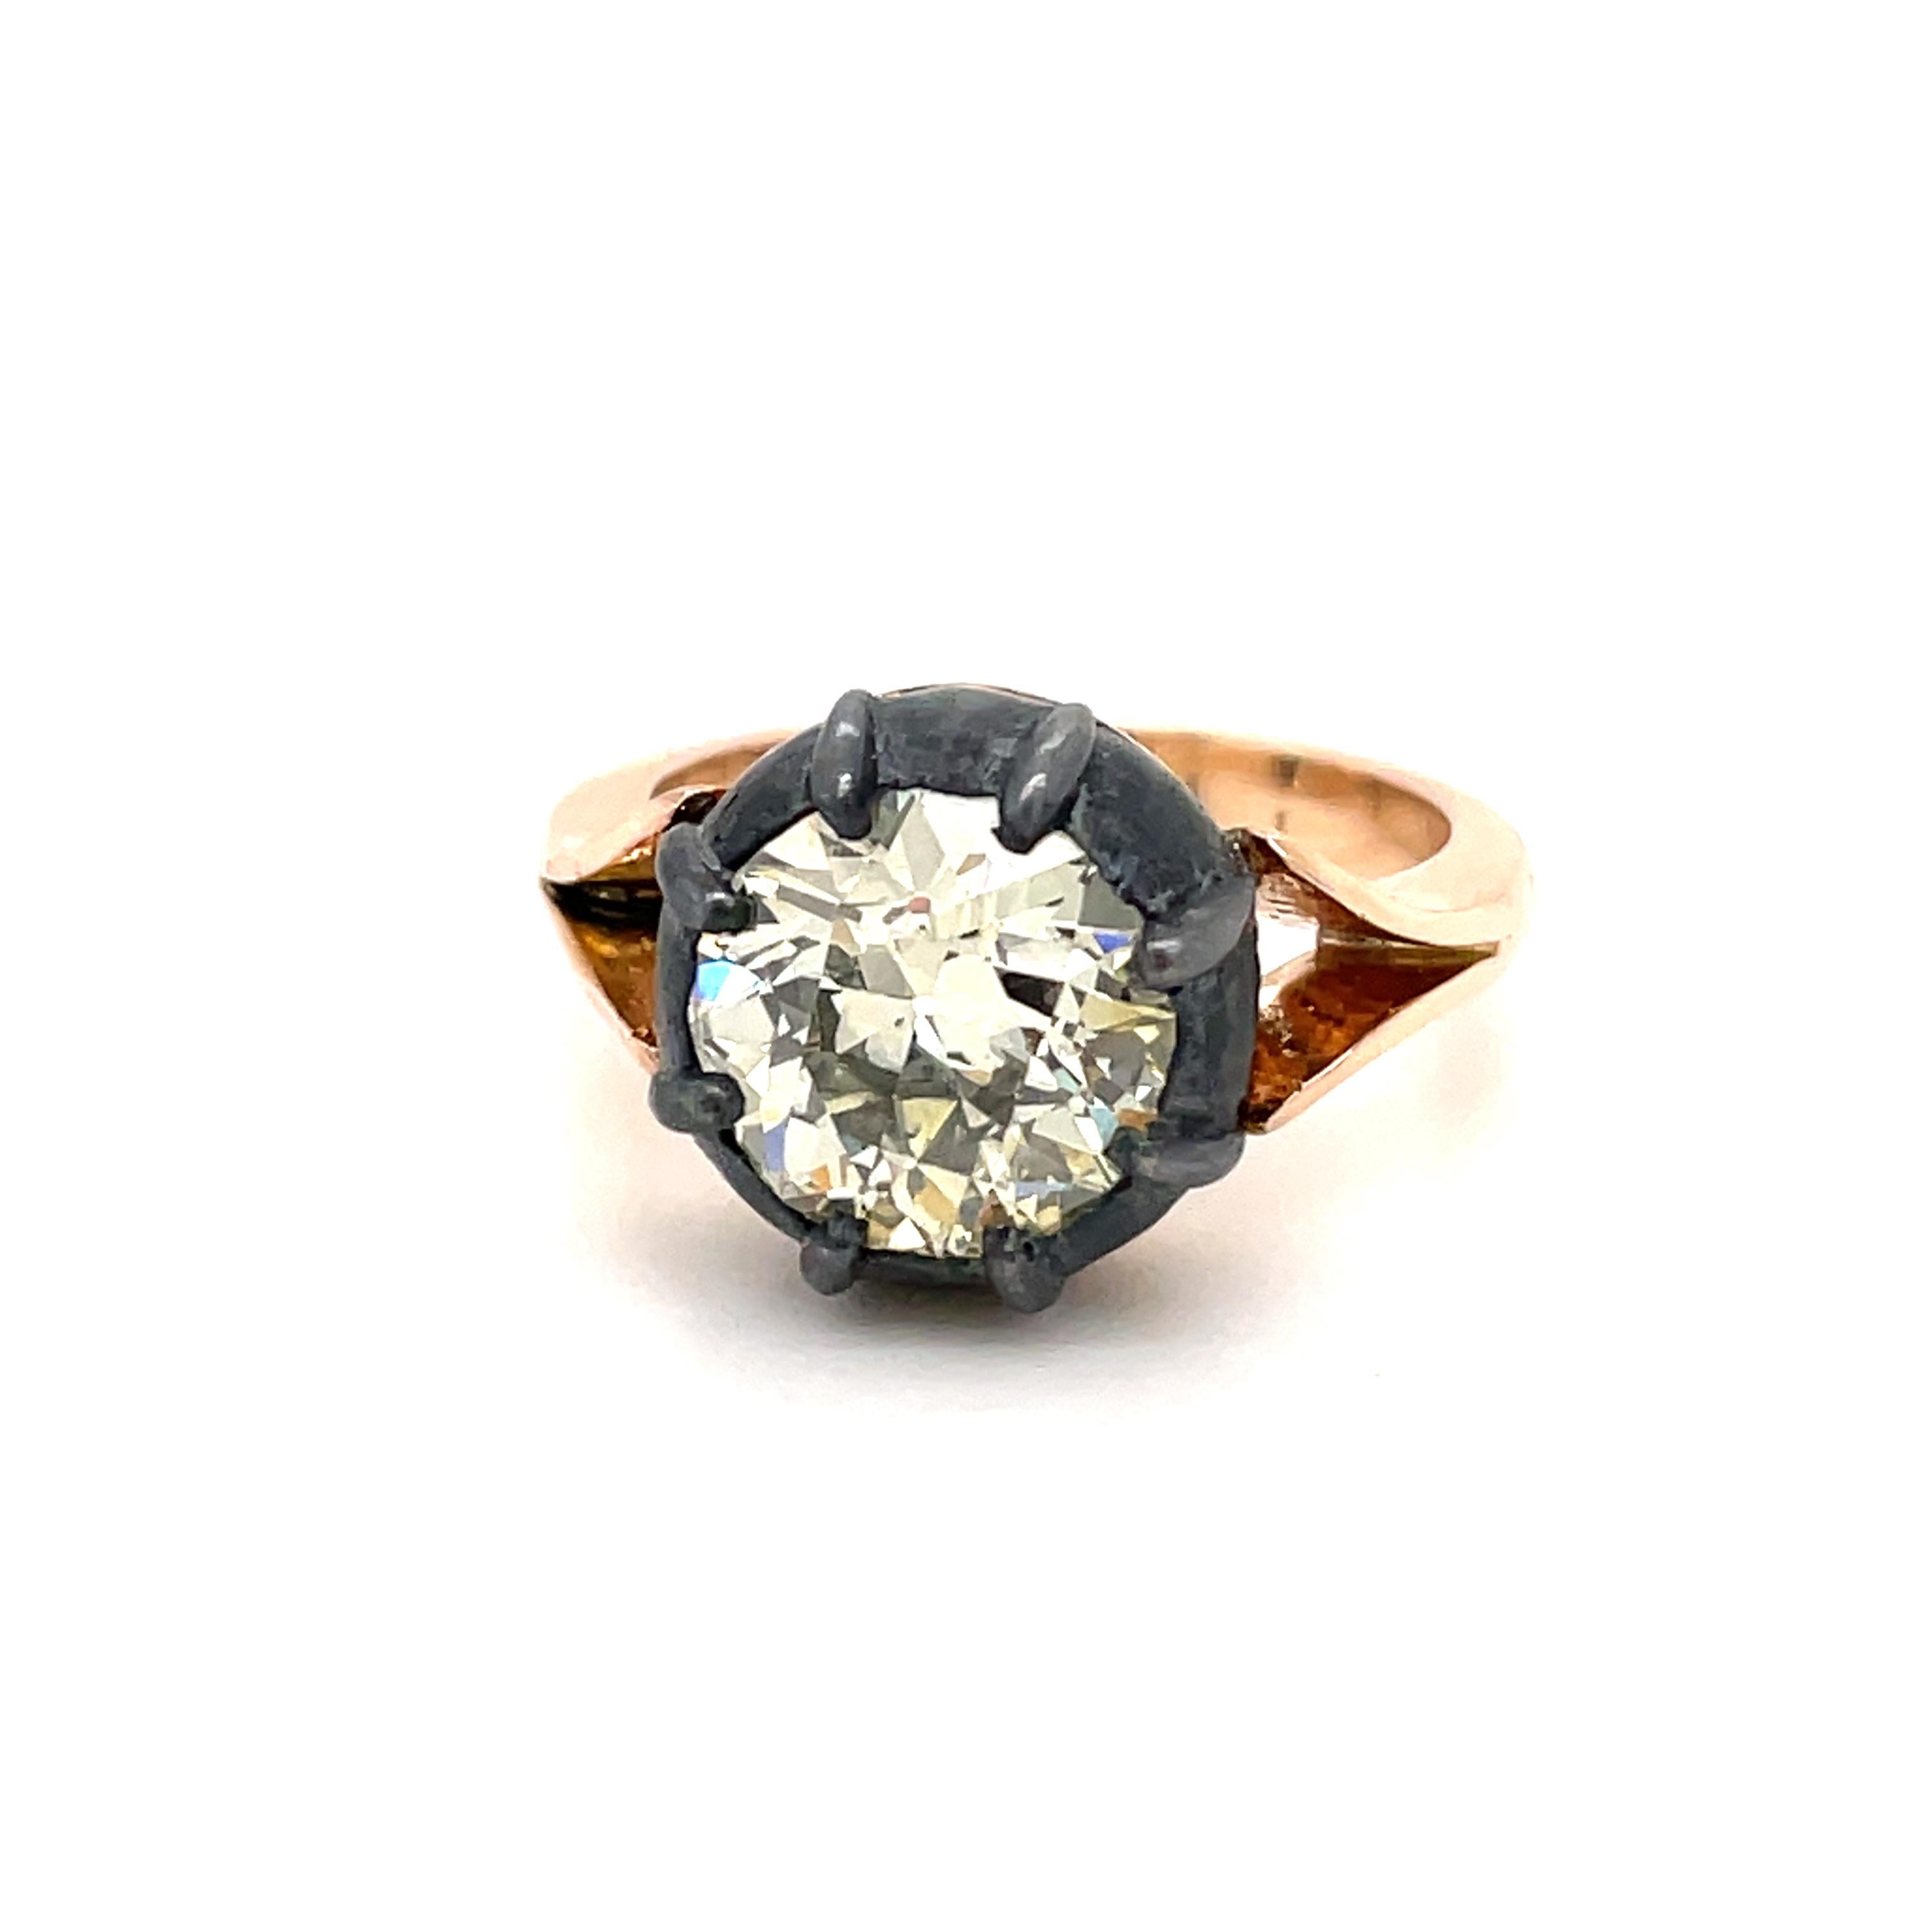 Set with a 3.40 ct. old mine cut diamond in a Georgian style cut-down setting and signature Button Back setting, it has a timeless yet modern aesthetic. Designed to be layered and mixed for an effortless look, the ring is handcrafted in 18k white